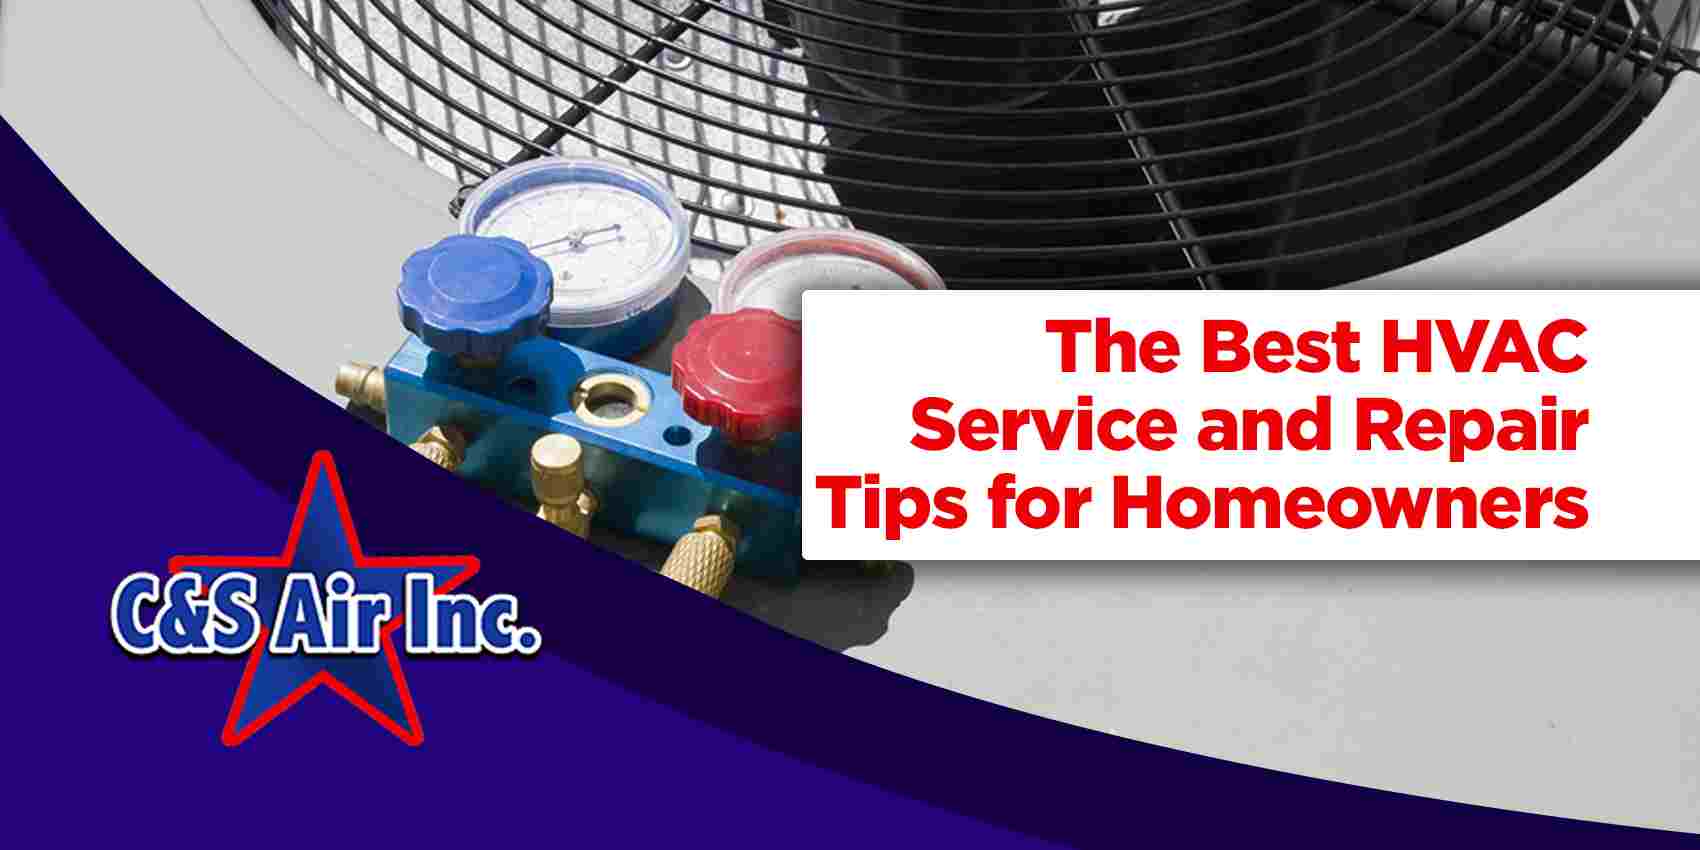 The Best HVAC Service and Repair Tips for Homeowners